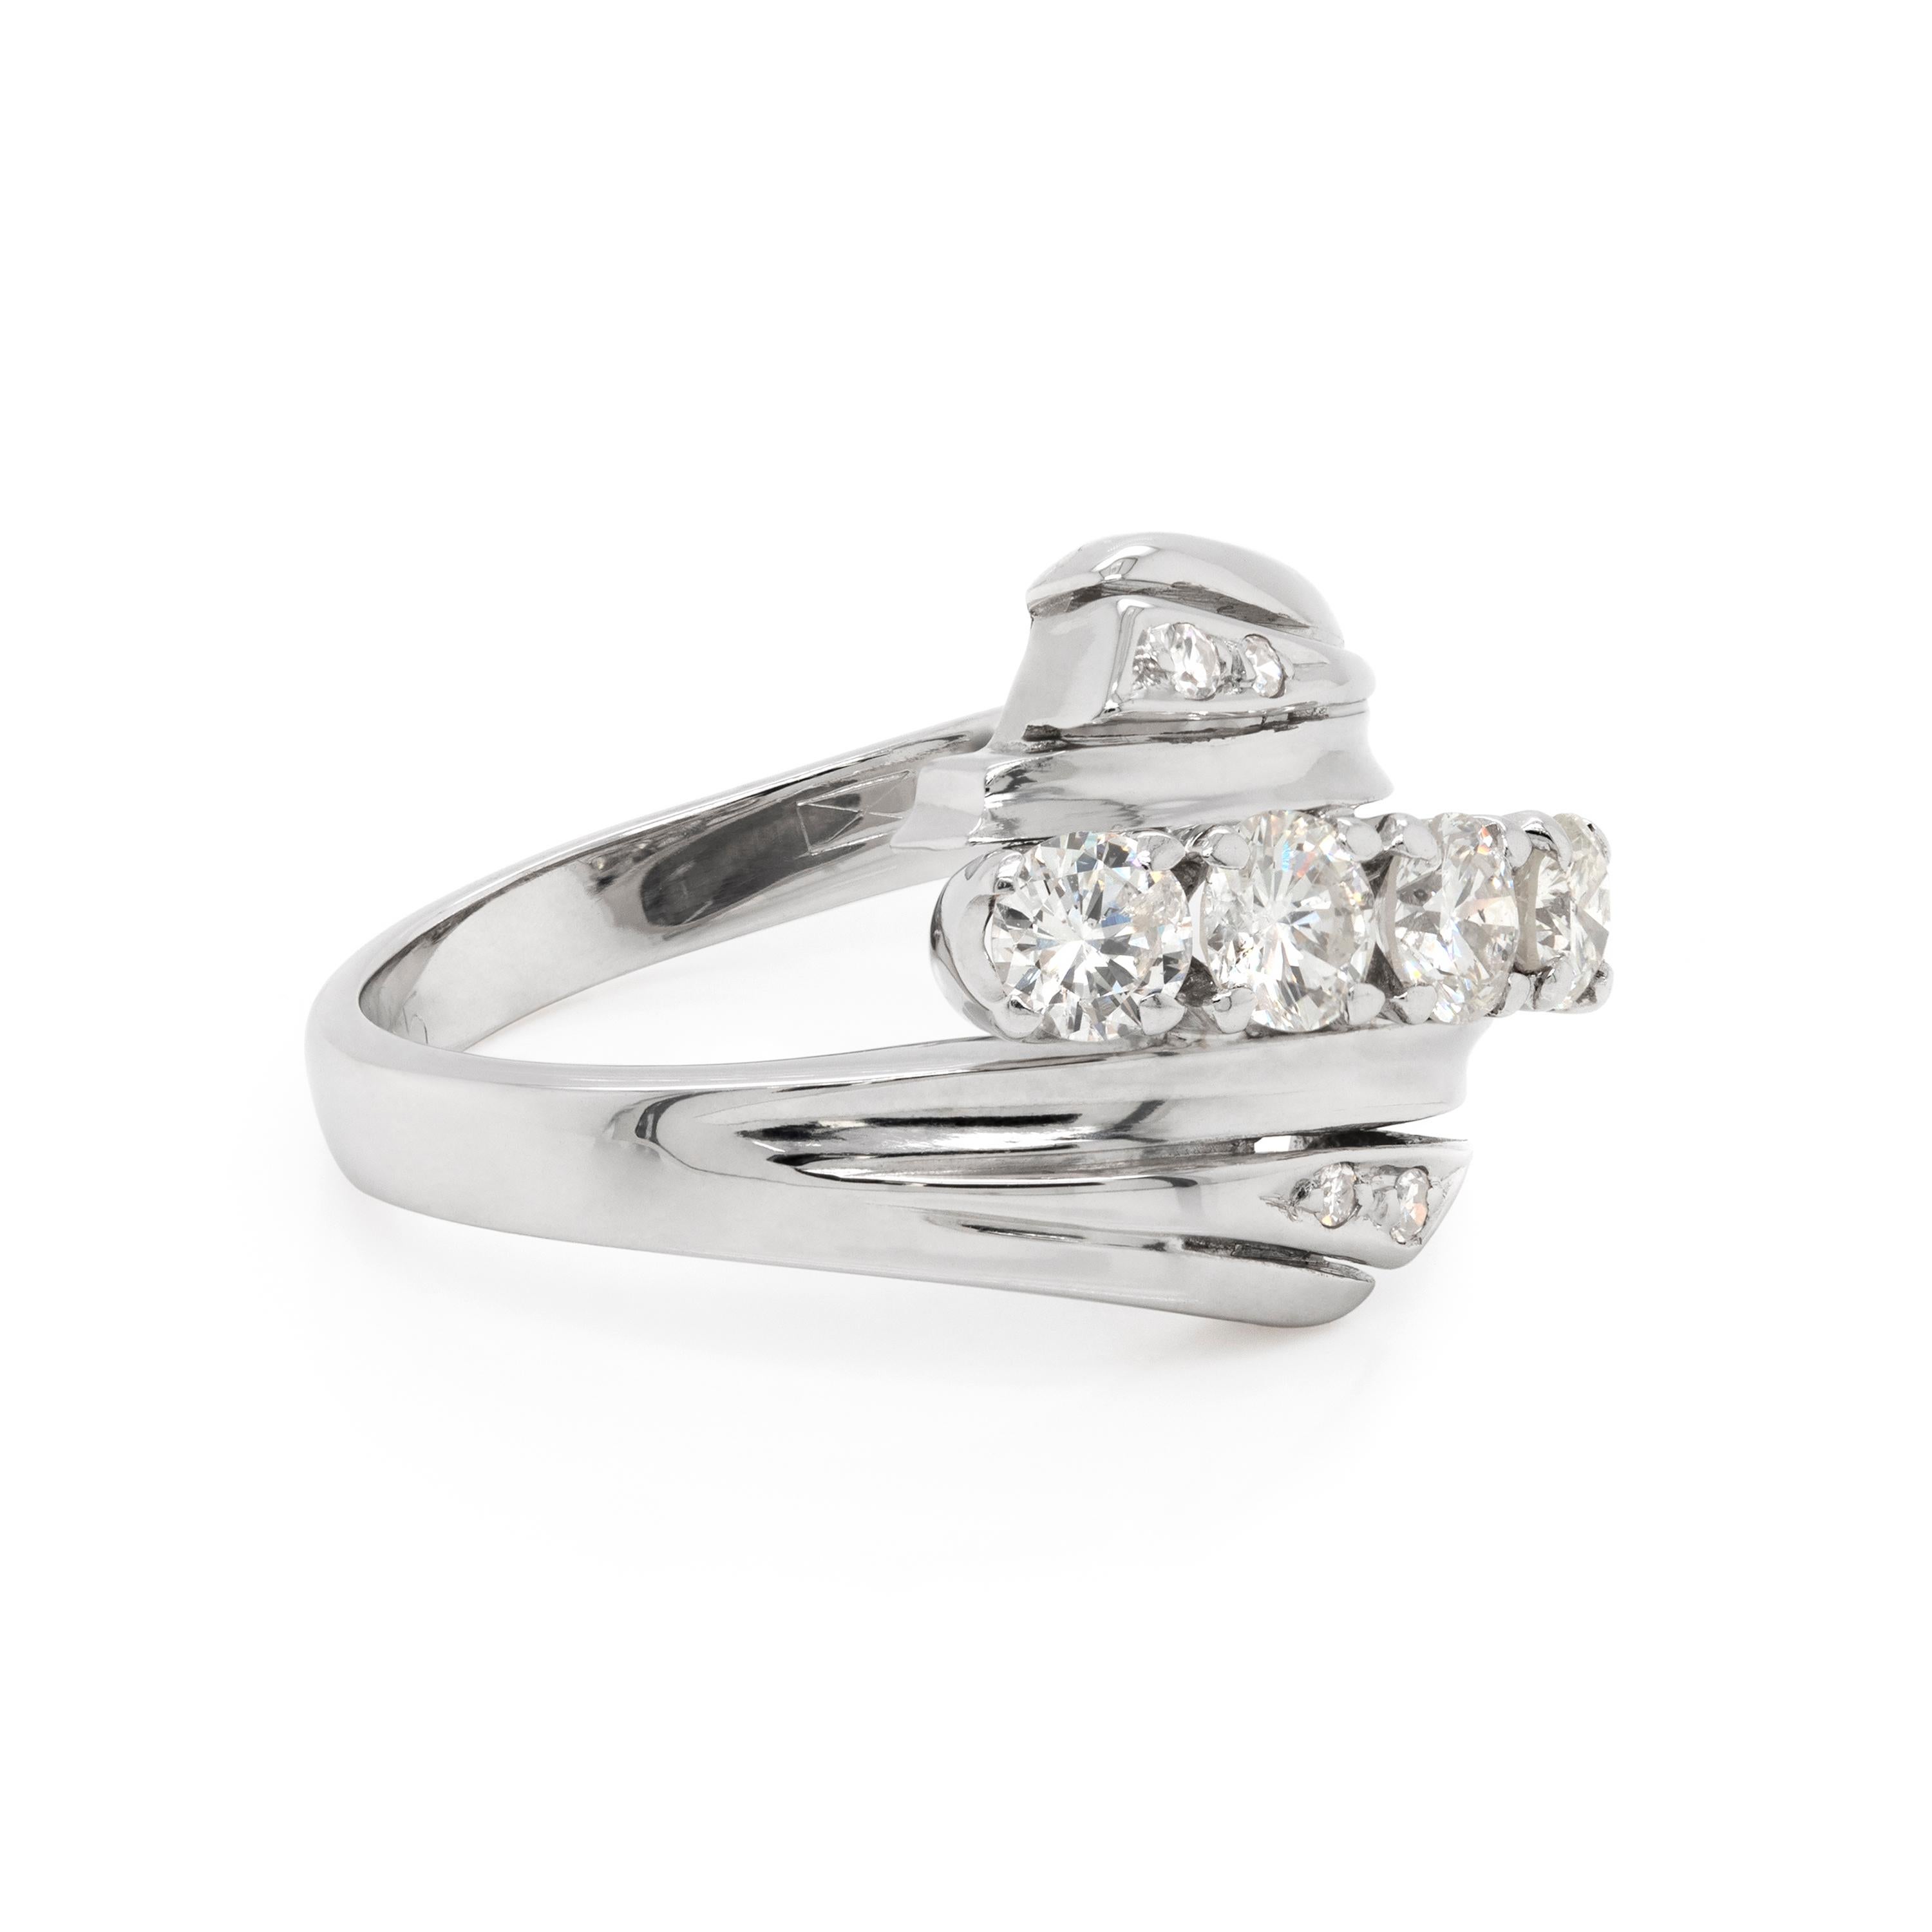 This beautiful 18 carat white gold crossover dress ring features four round brilliant cut diamonds weighing approximately 1.00ct in total, all mounted in claw, open back settings. The central stones are beautifully set within twisted shoulders, both